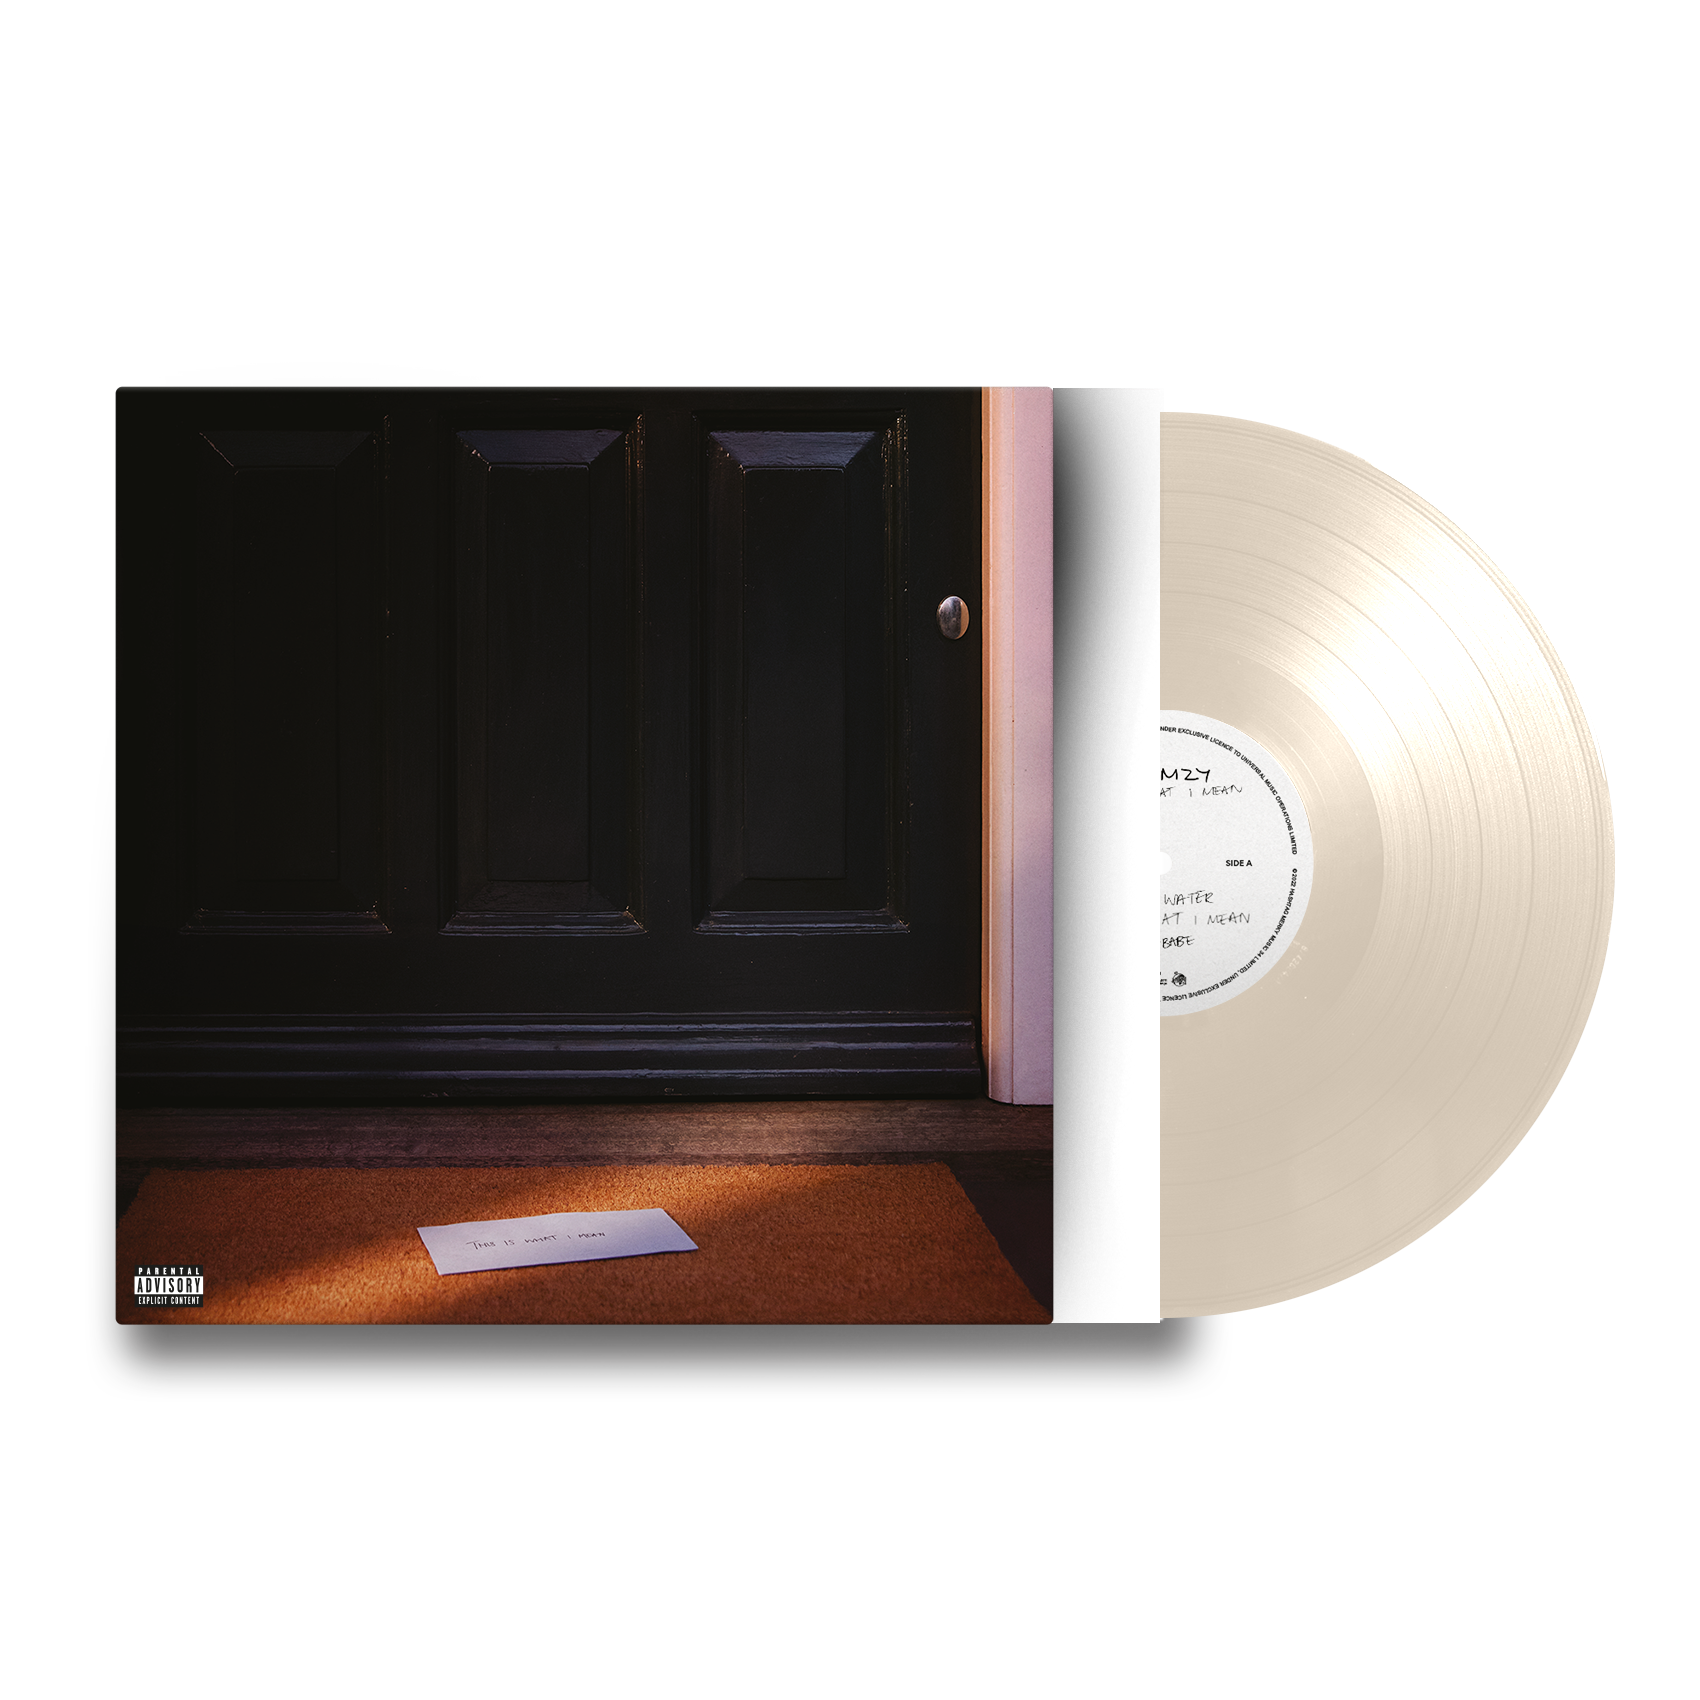 This Is What I Mean: Limited Cream Vinyl 2LP + Exclusive Signed Art Card